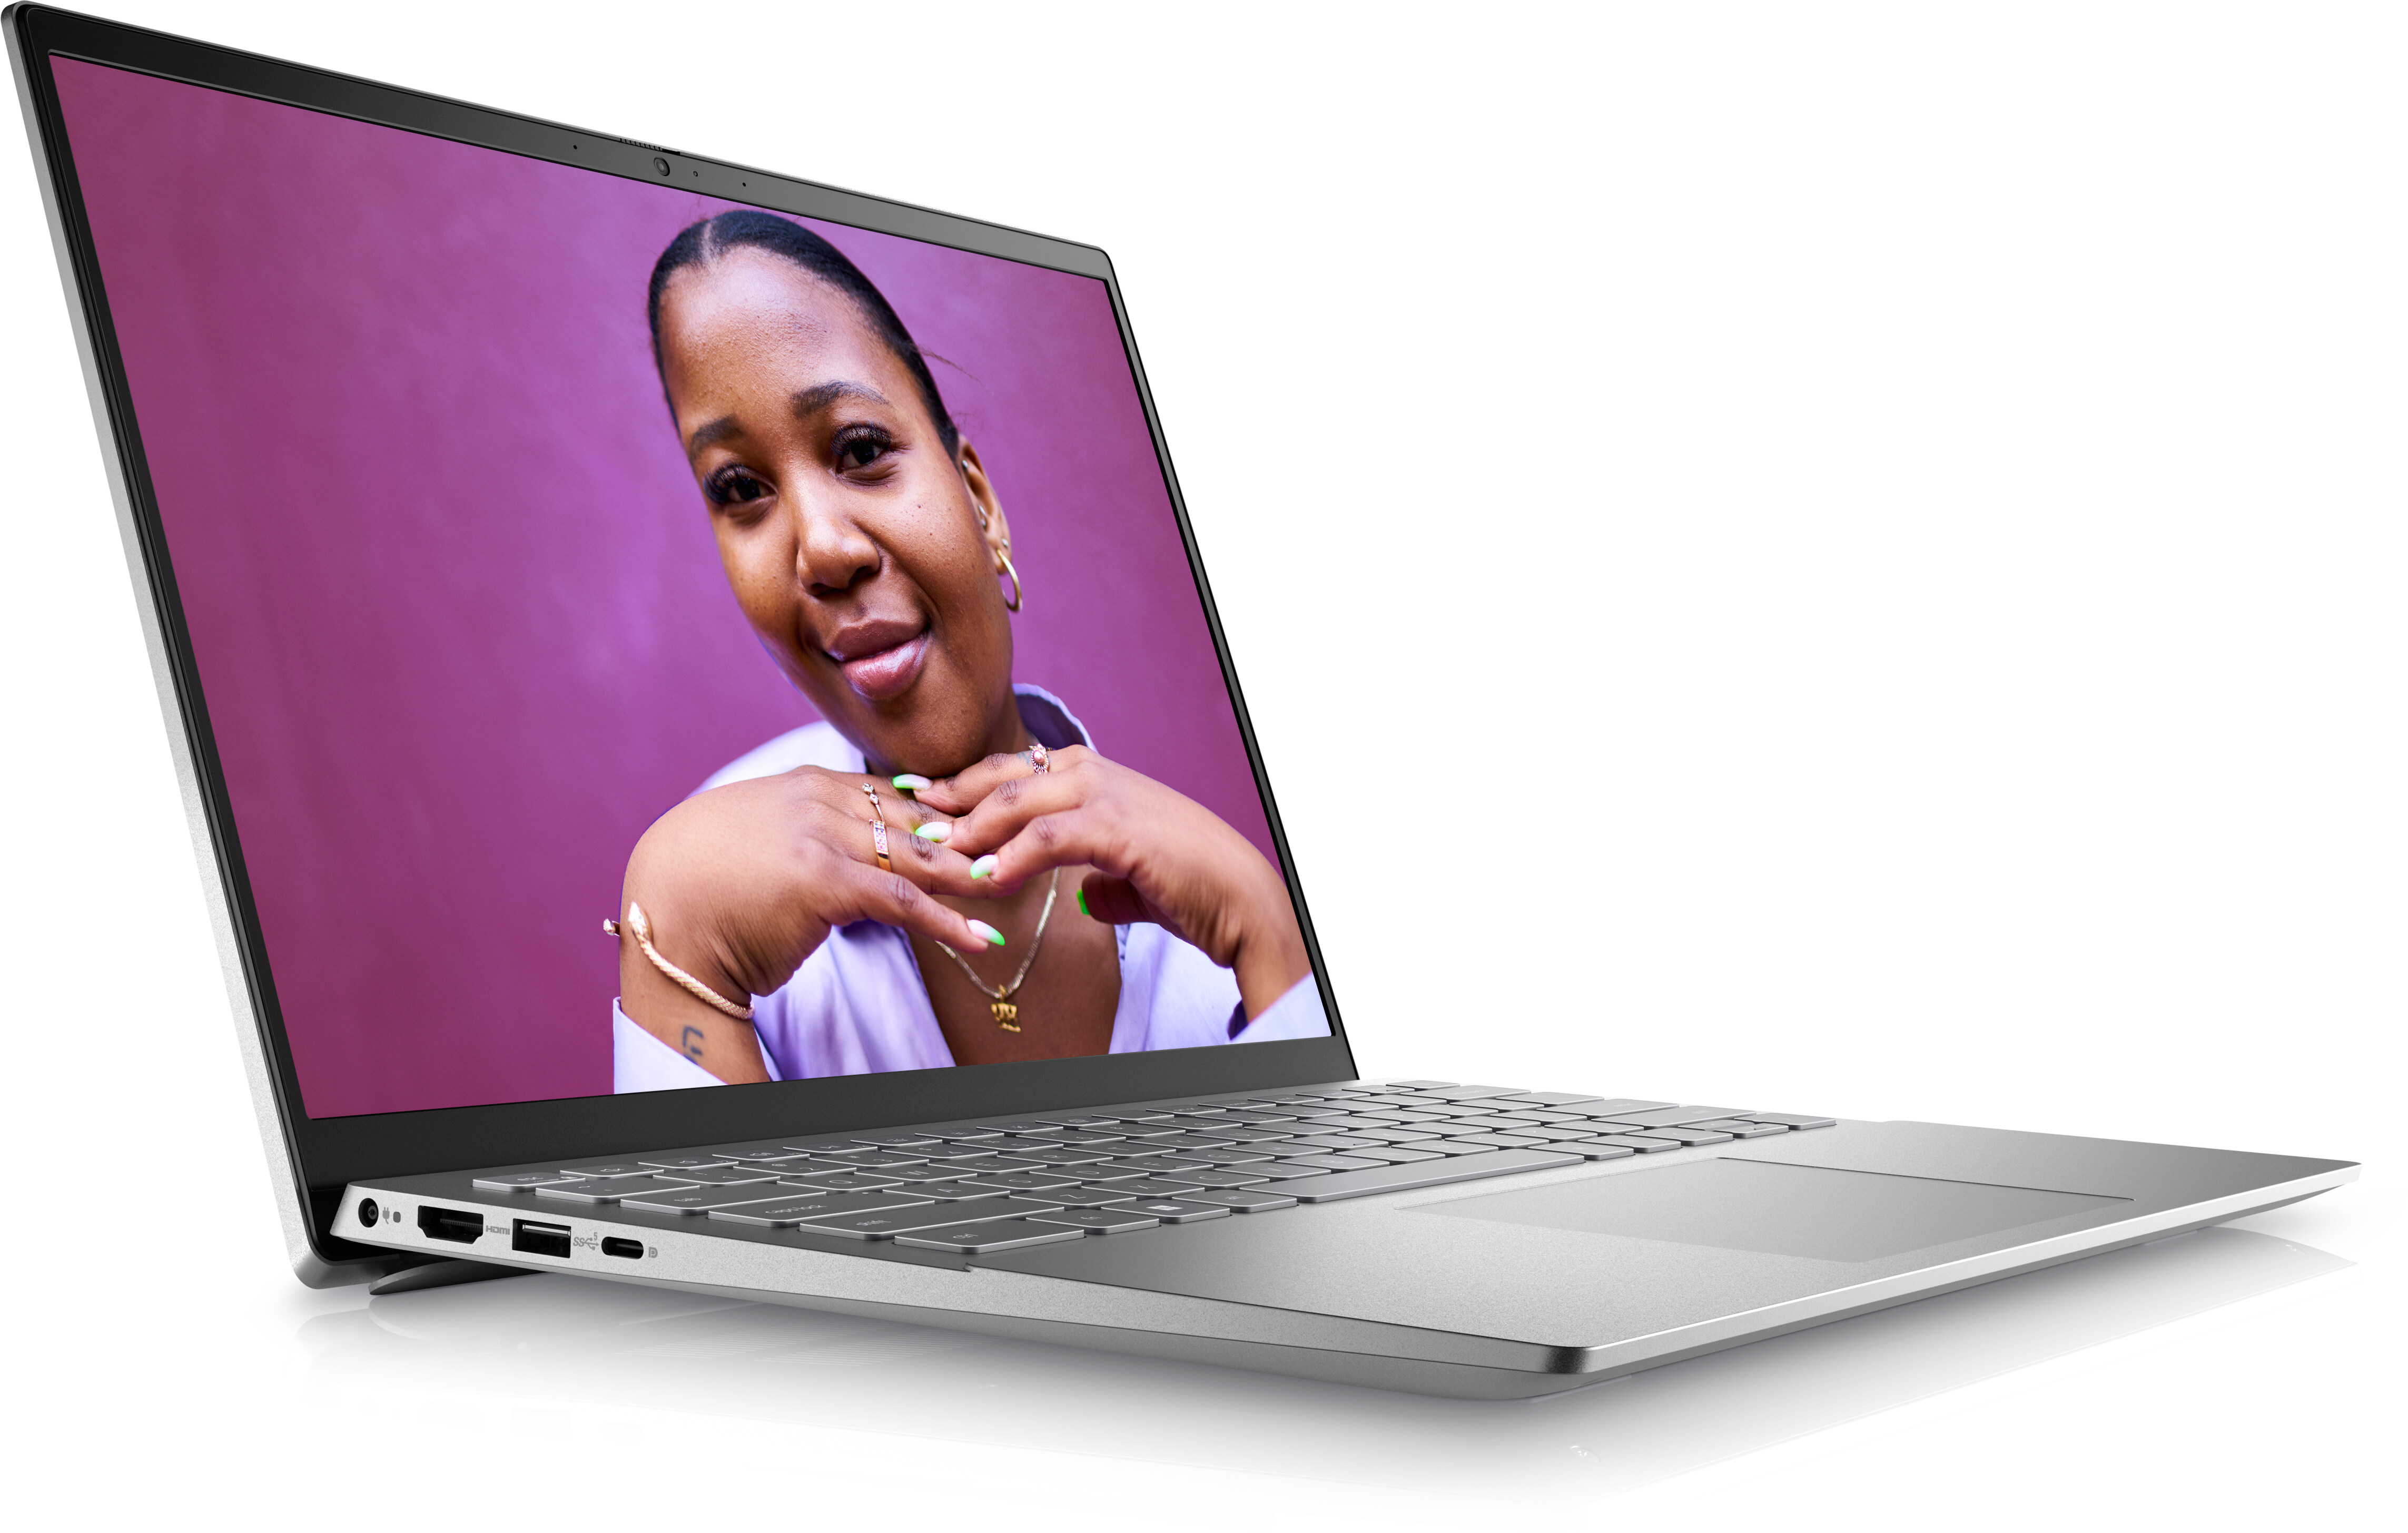 Inspiron 14-inch Laptop with AMD Mobile Processor | Dell Canada